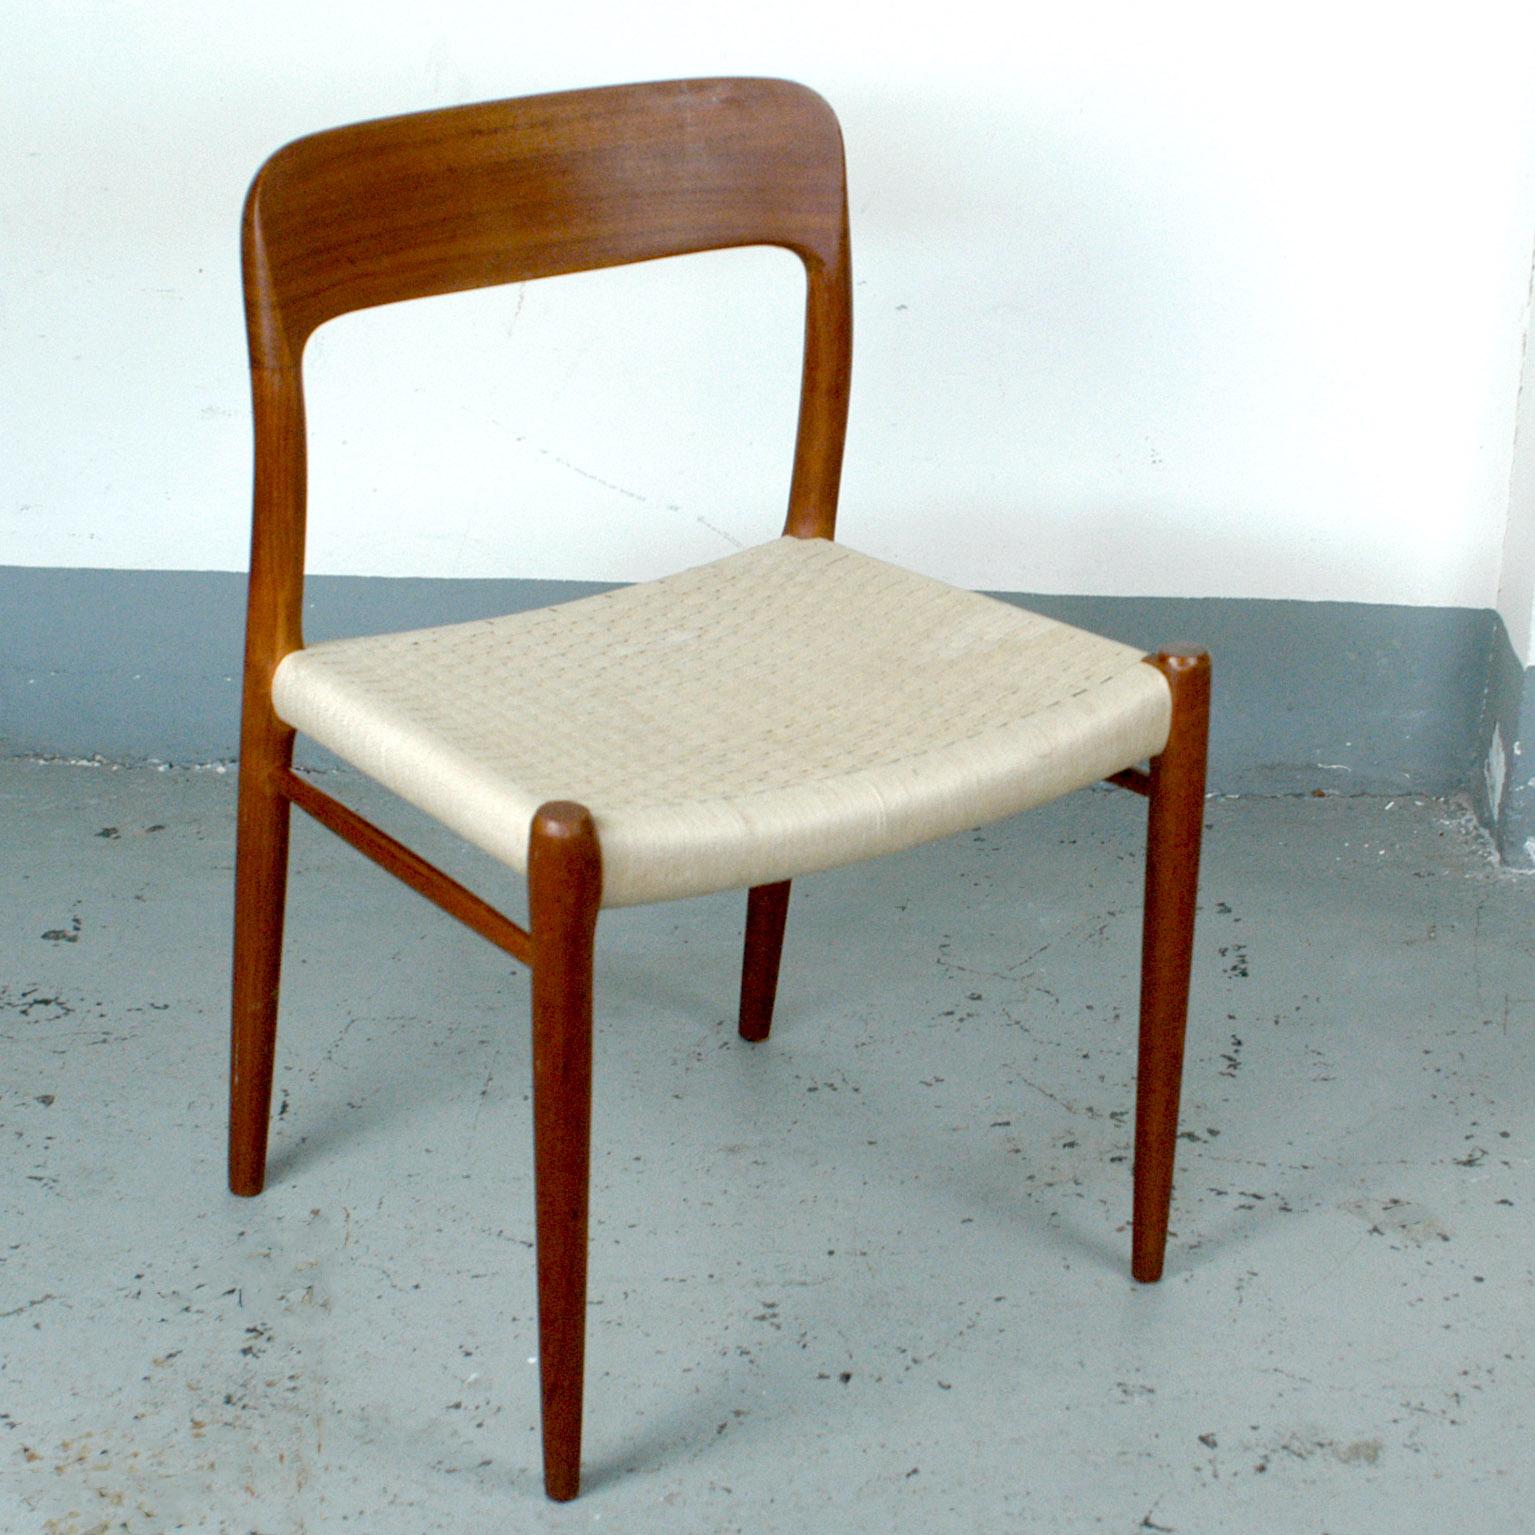 Excellent set of Danish 1960s dining chairs designed by Niels Otto Møller. It was the second design he created and very popular until today. The rounded backrest is sculpted out of solid teak , the seats are made of woven cord- perfect chairs for